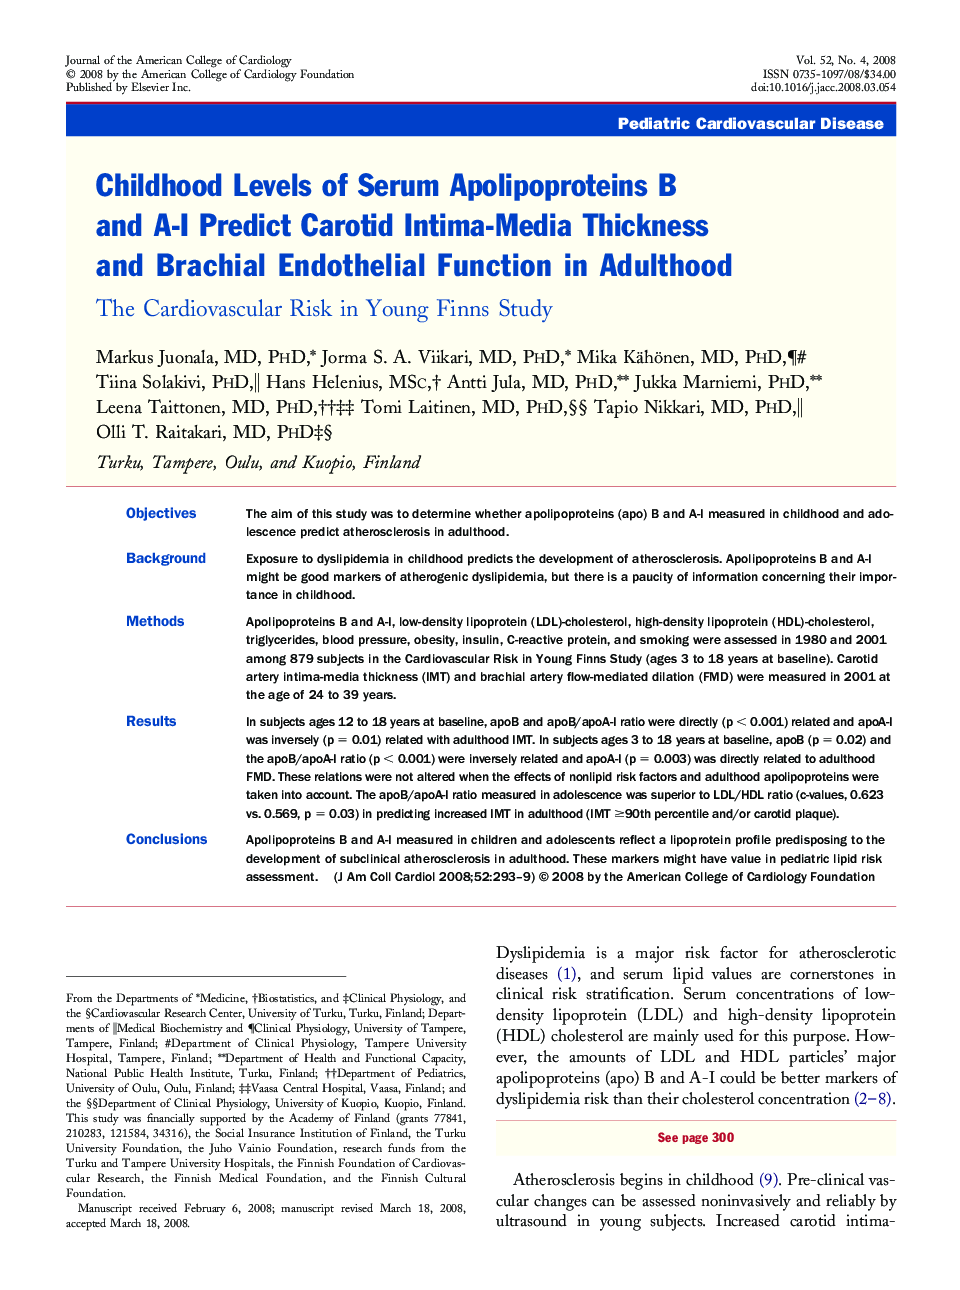 Childhood Levels of Serum Apolipoproteins B and A-I Predict Carotid Intima-Media Thickness and Brachial Endothelial Function in Adulthood : The Cardiovascular Risk in Young Finns Study